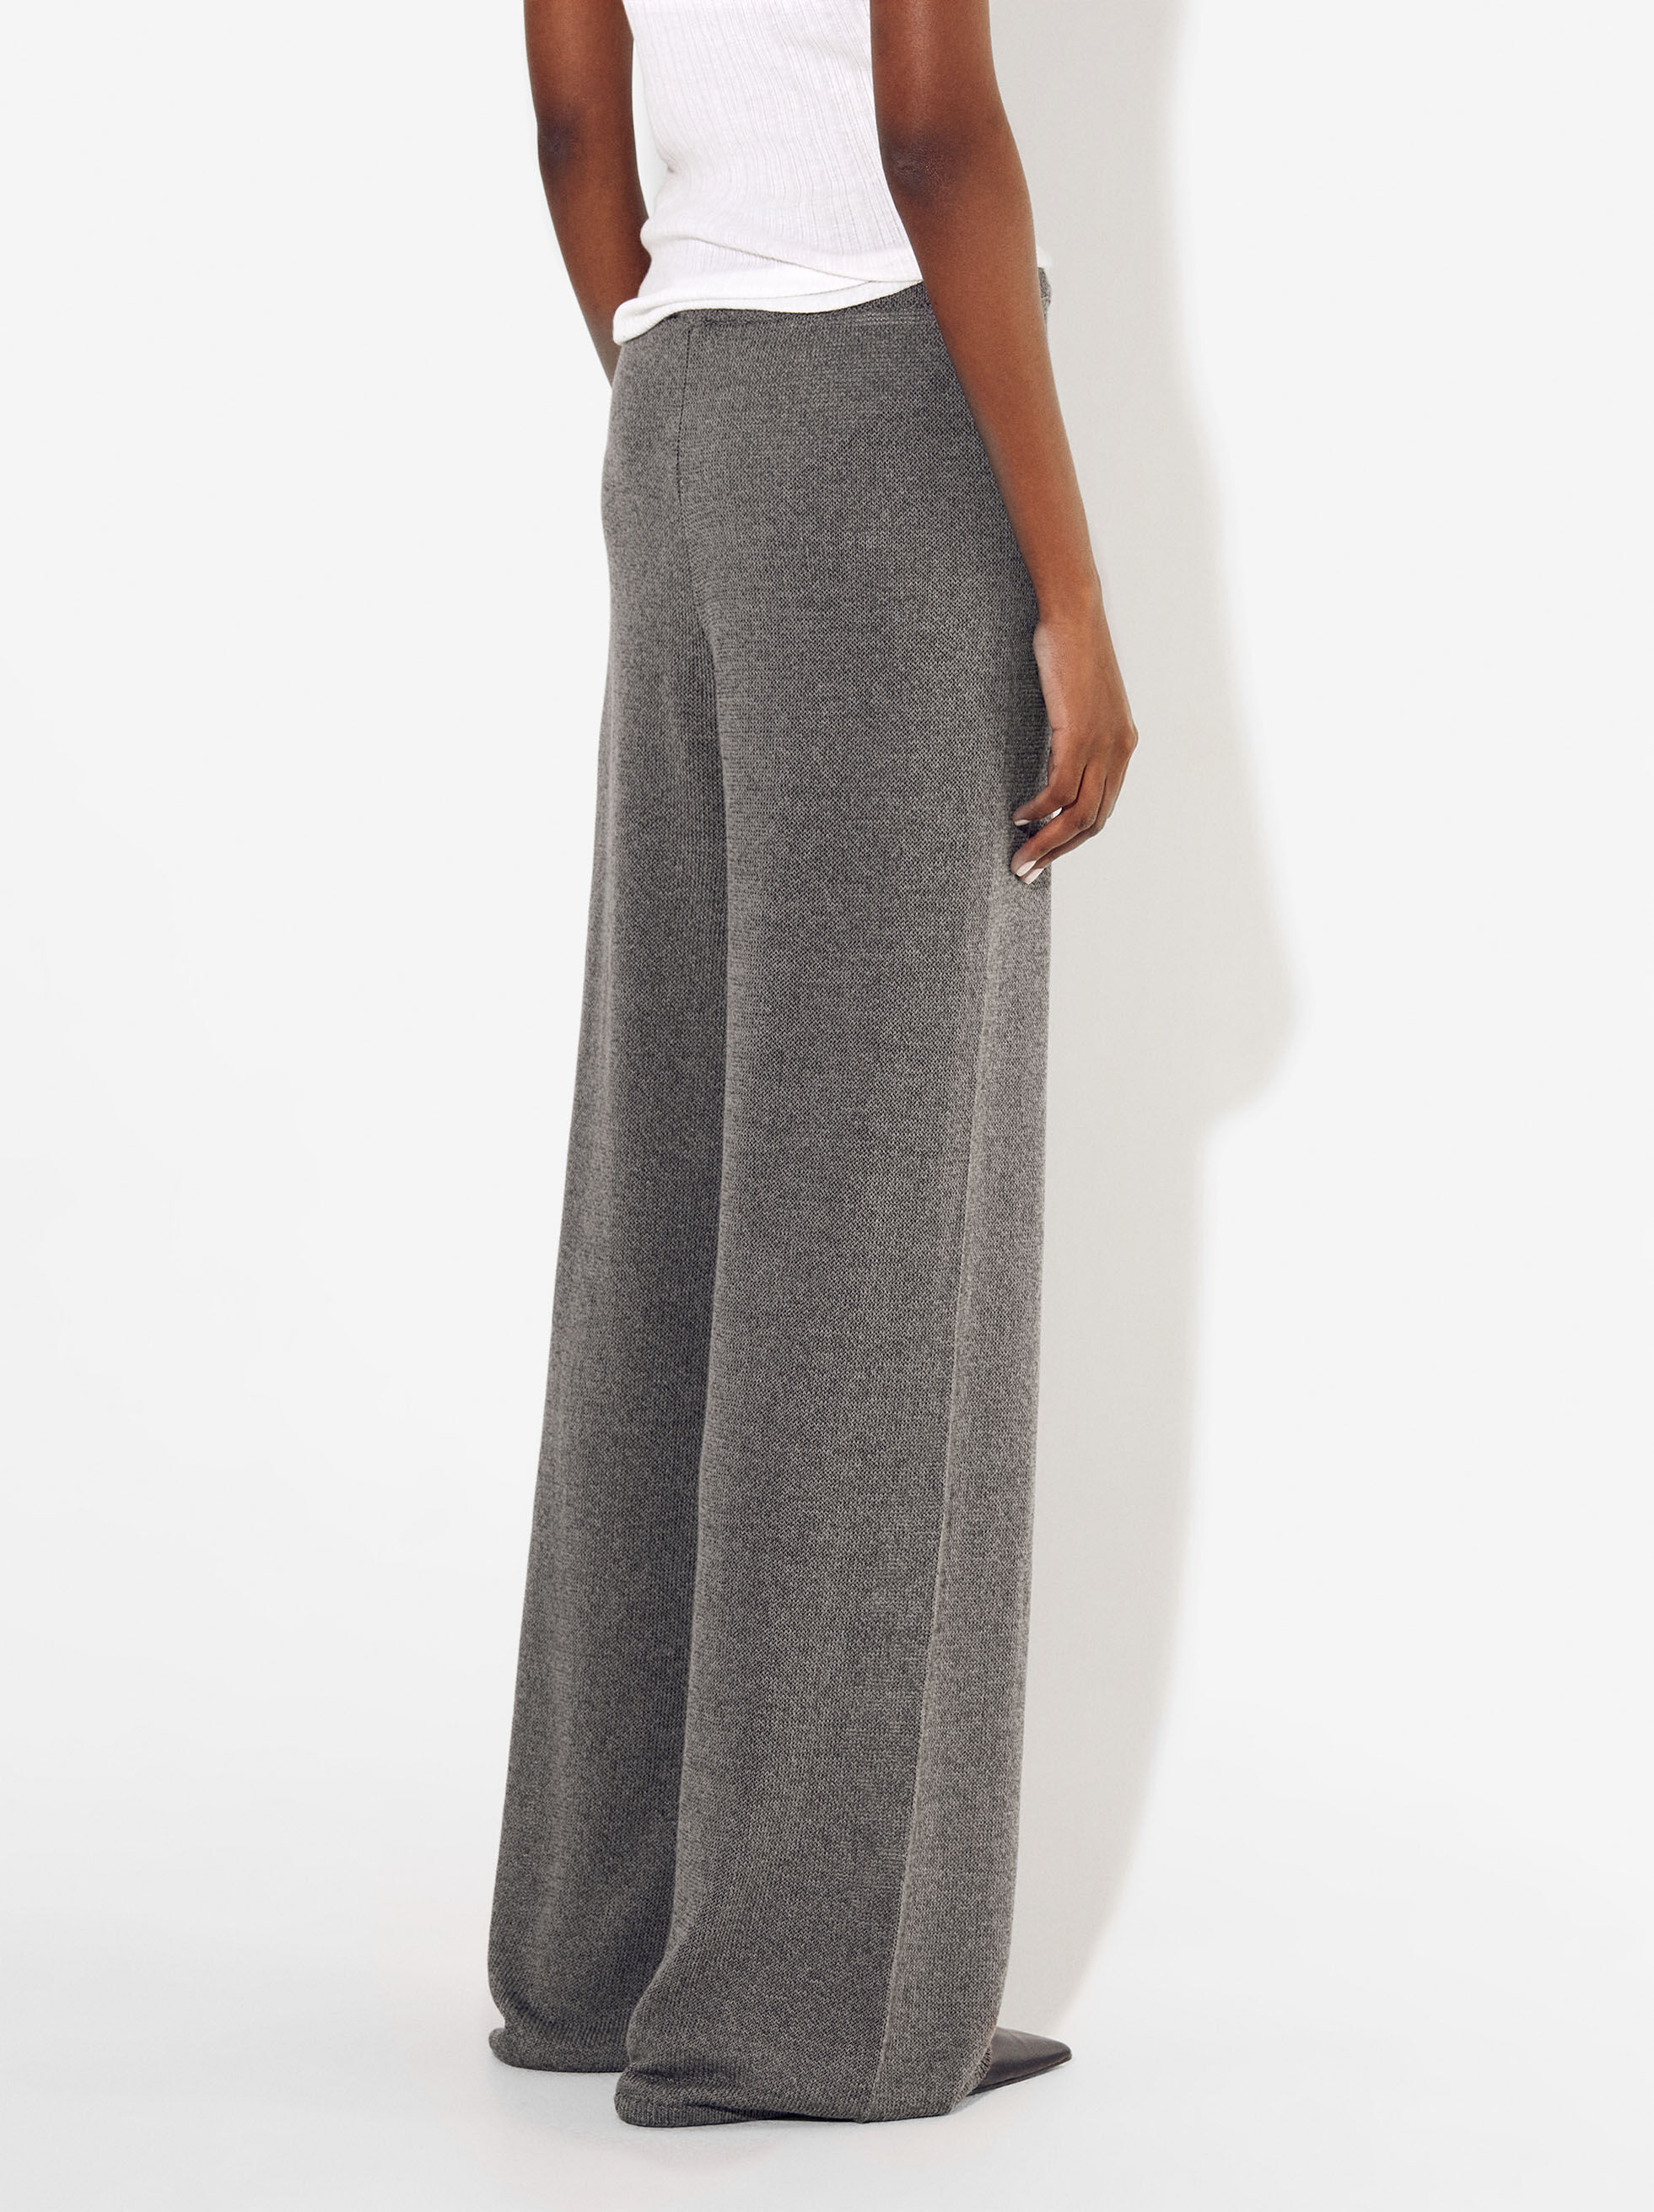 ASYOU knitted flare trouser co-ord in grey | ASOS